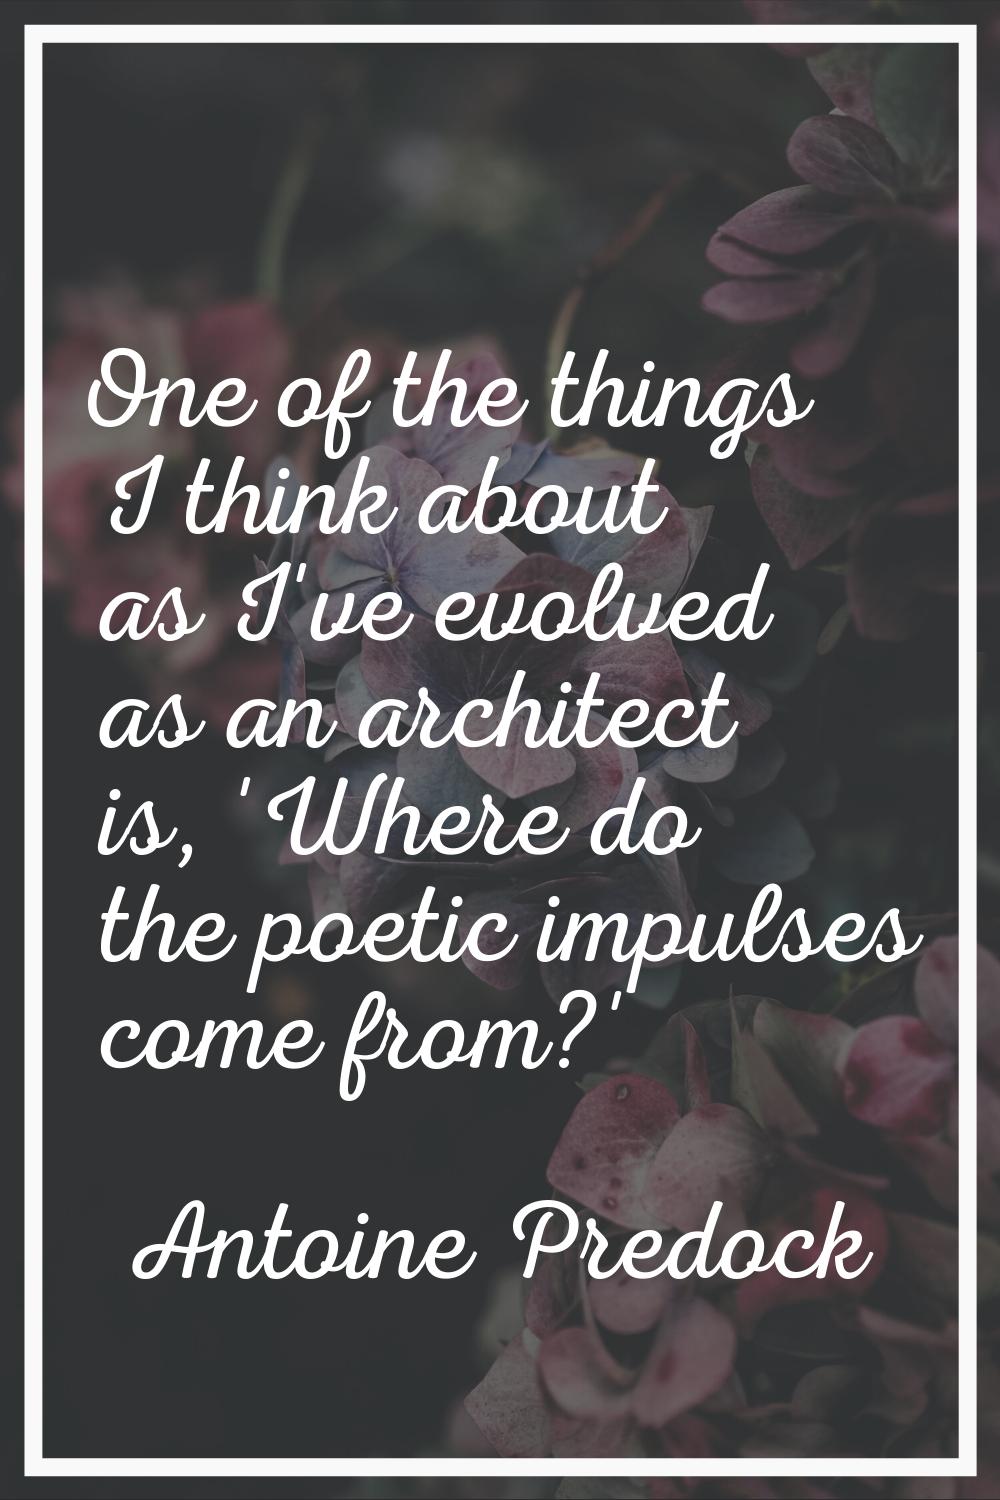 One of the things I think about as I've evolved as an architect is, 'Where do the poetic impulses c